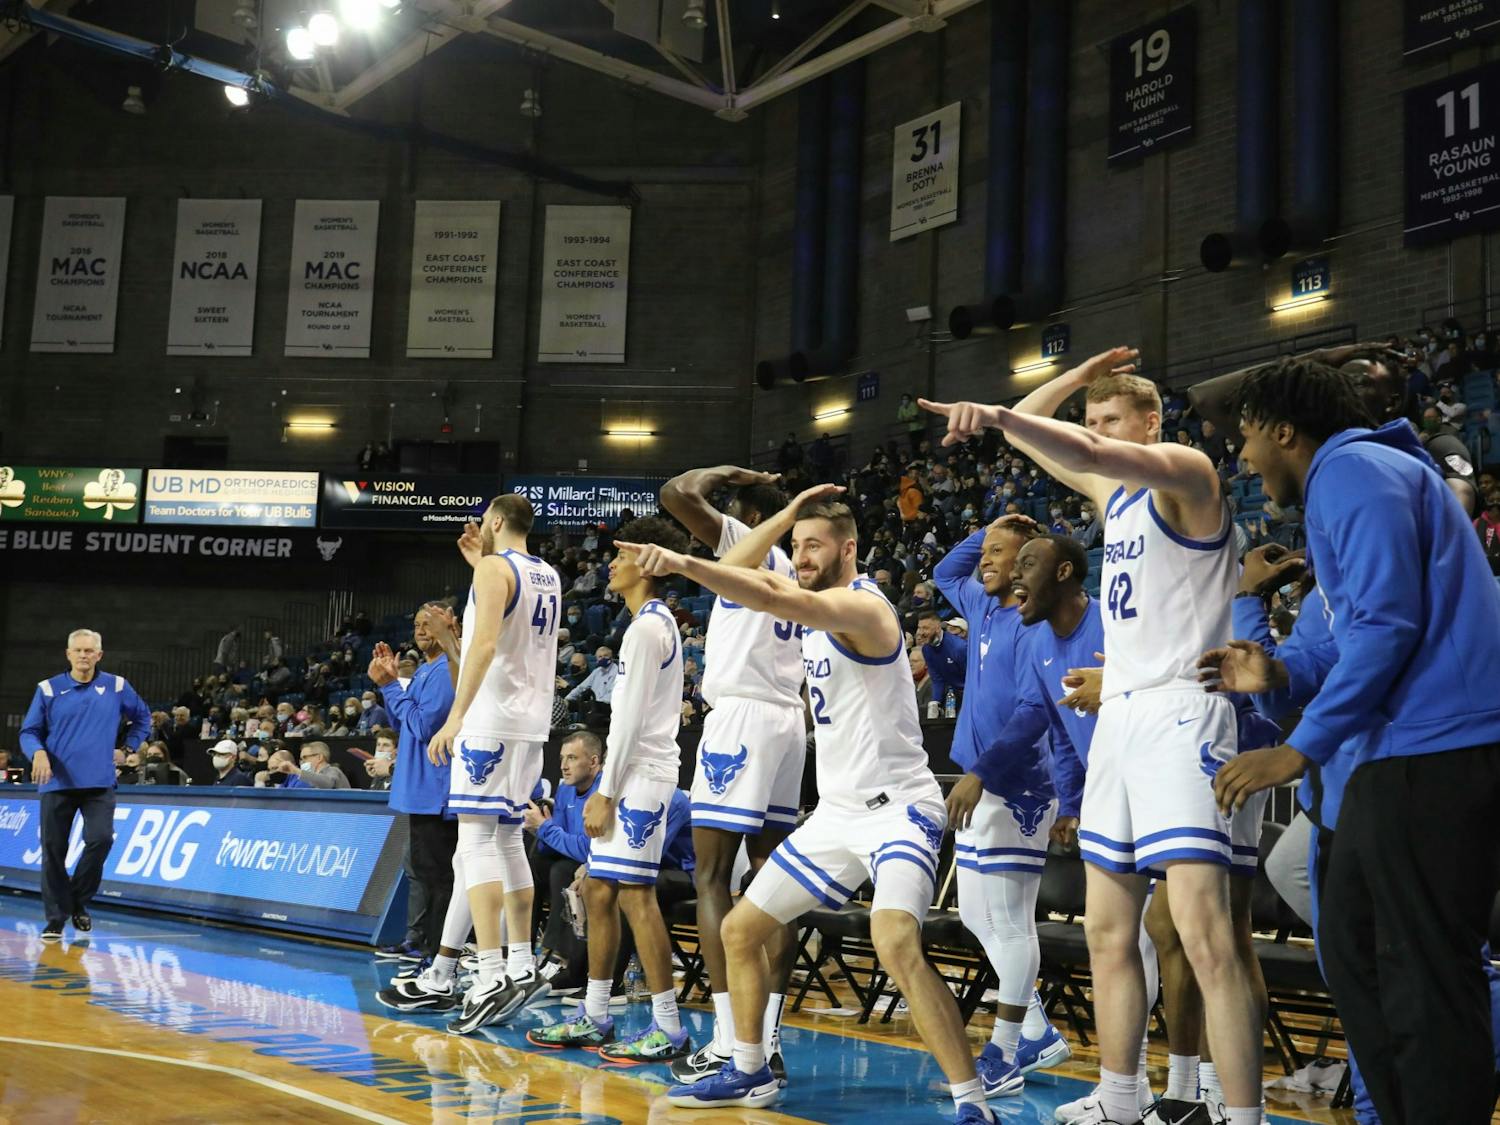 UB ran all over Eastern Michigan in a 102-64 victory at Alumni Arena Tuesday night.